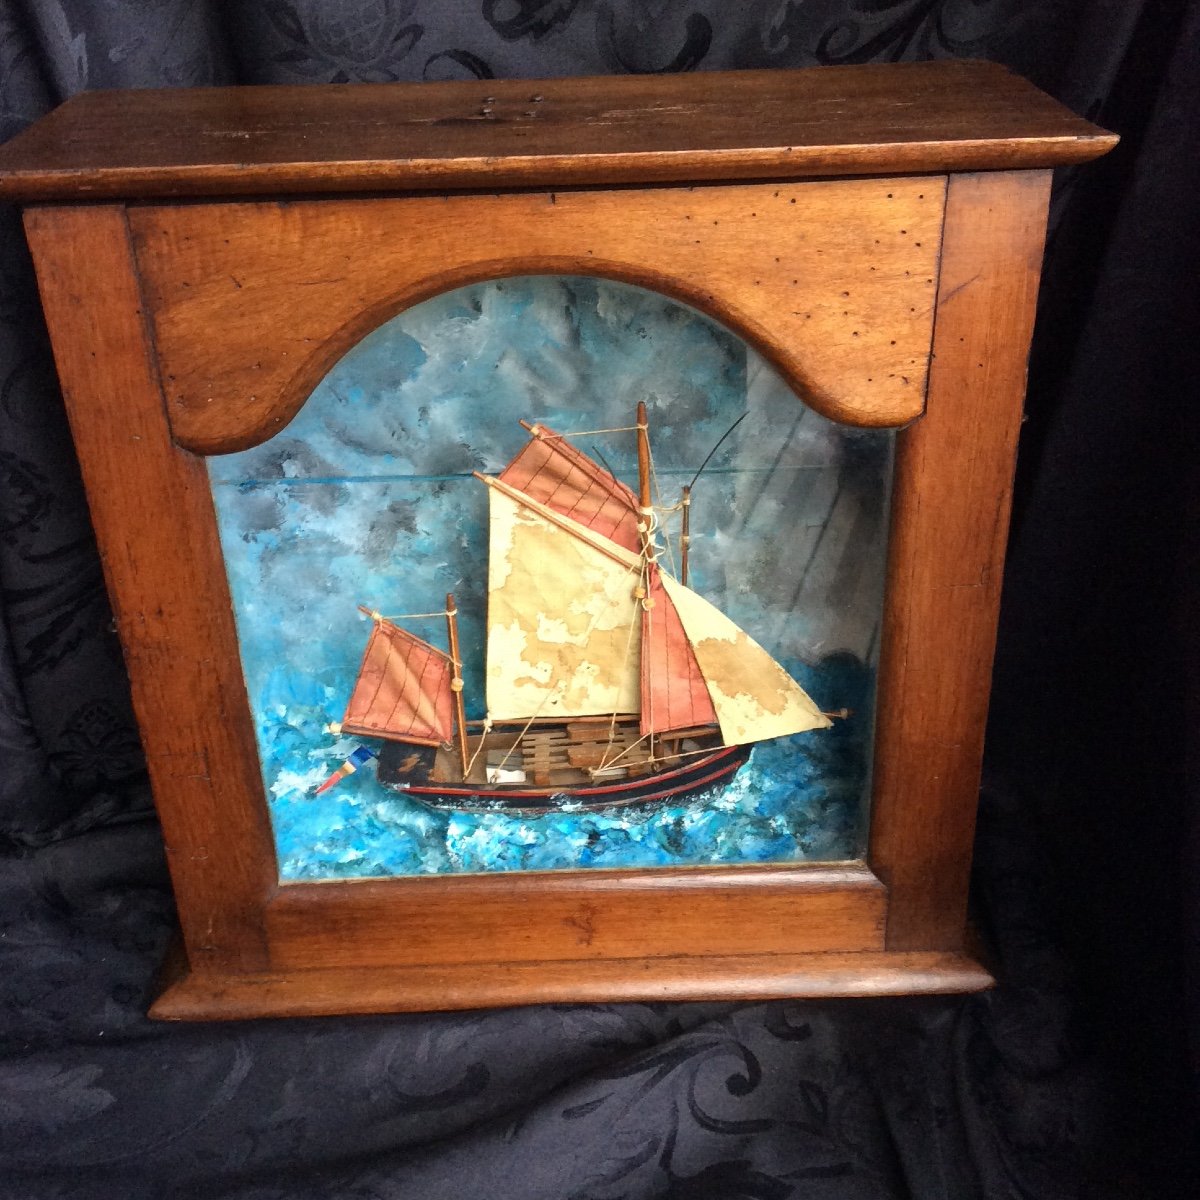 Diorama, Ex-voto, Tuna Boat From The Island Of Groix In The Storm In A Wooden Showcase, Named, Dated